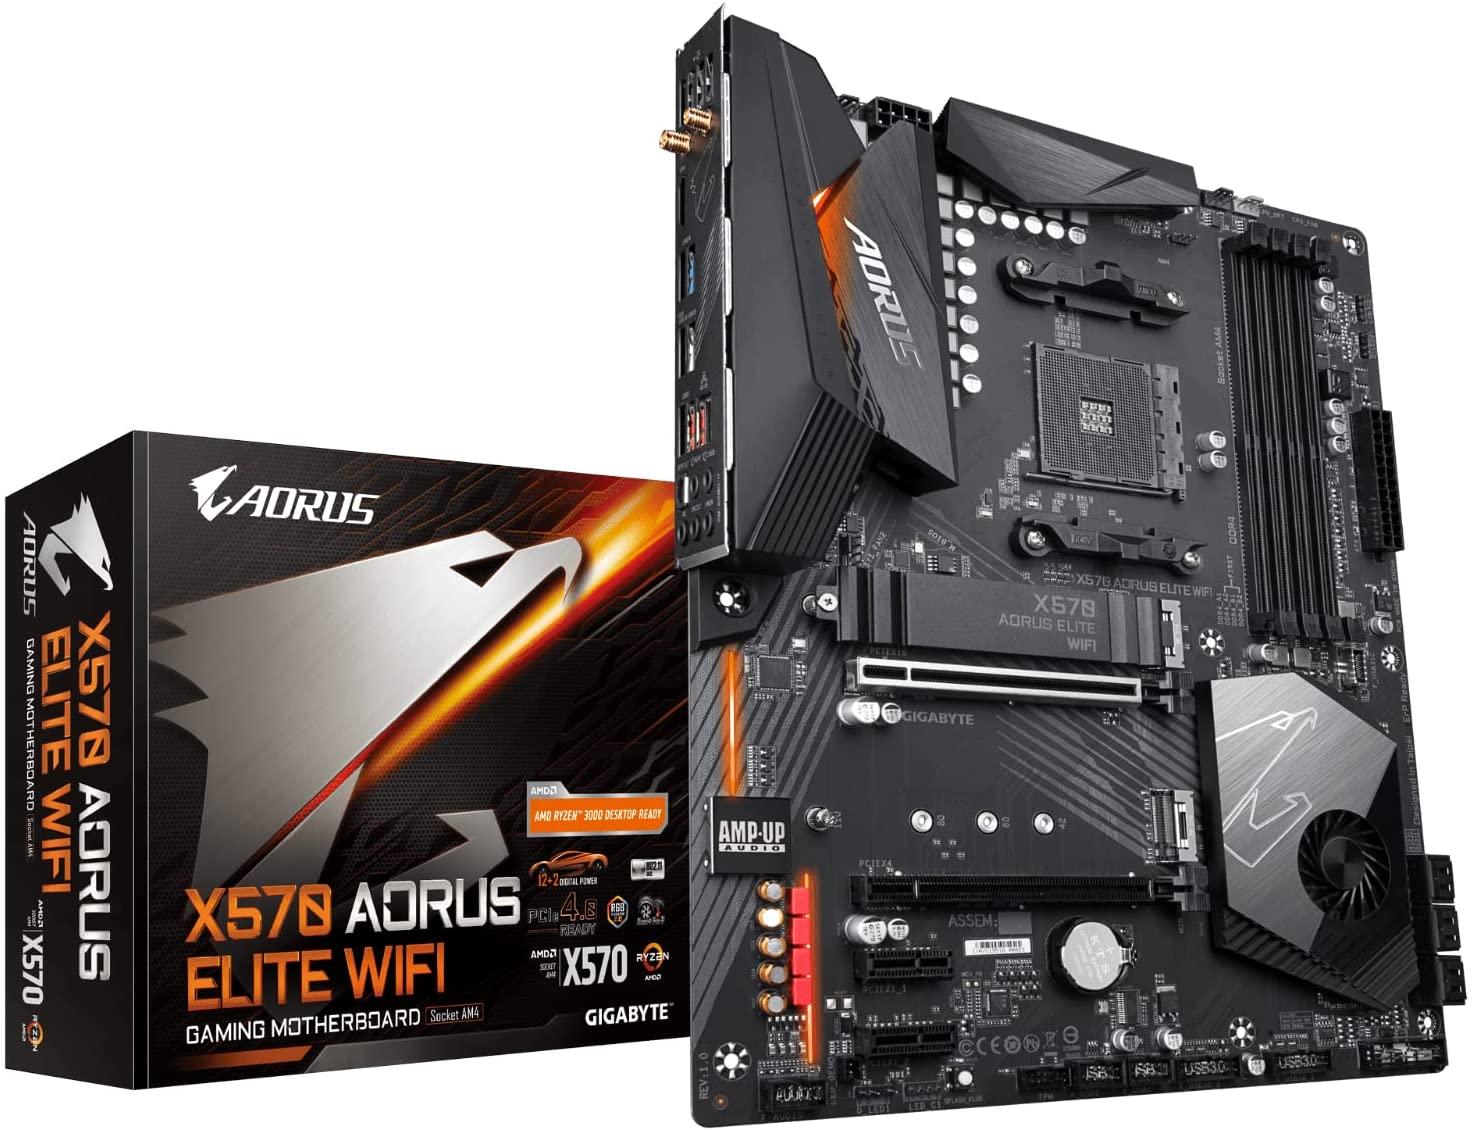 Gigabyte X570 Aorus Elite Wi-Fi AM4 Motherboard for $129.99 Shipped After Rebate